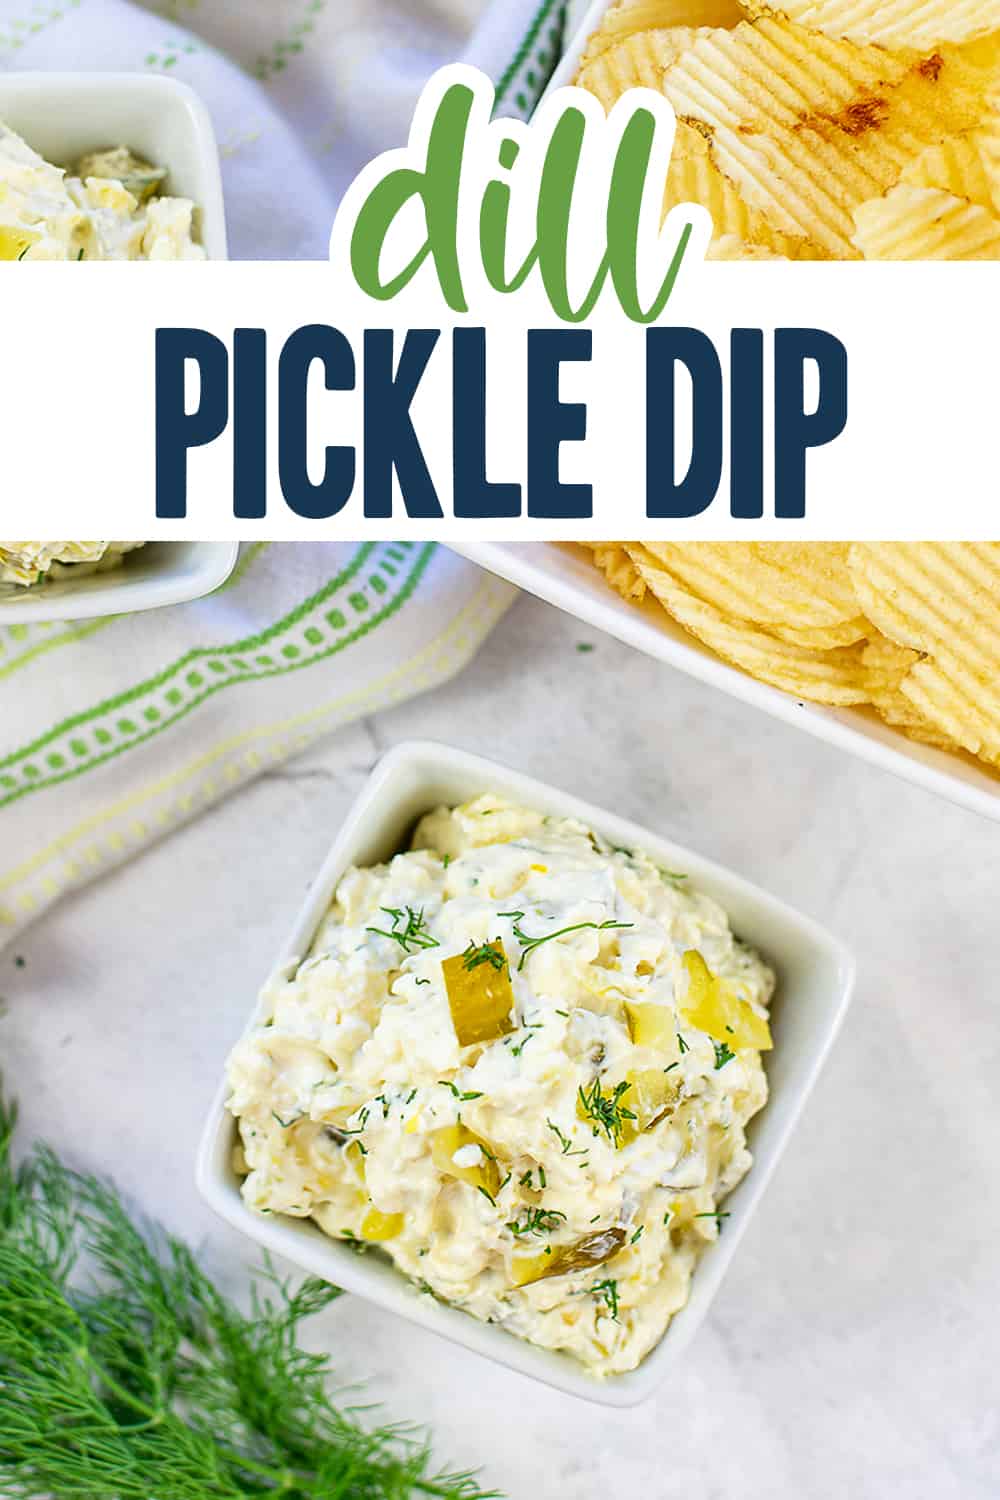 dill pickle dip in small bowls with text for Pinterest.